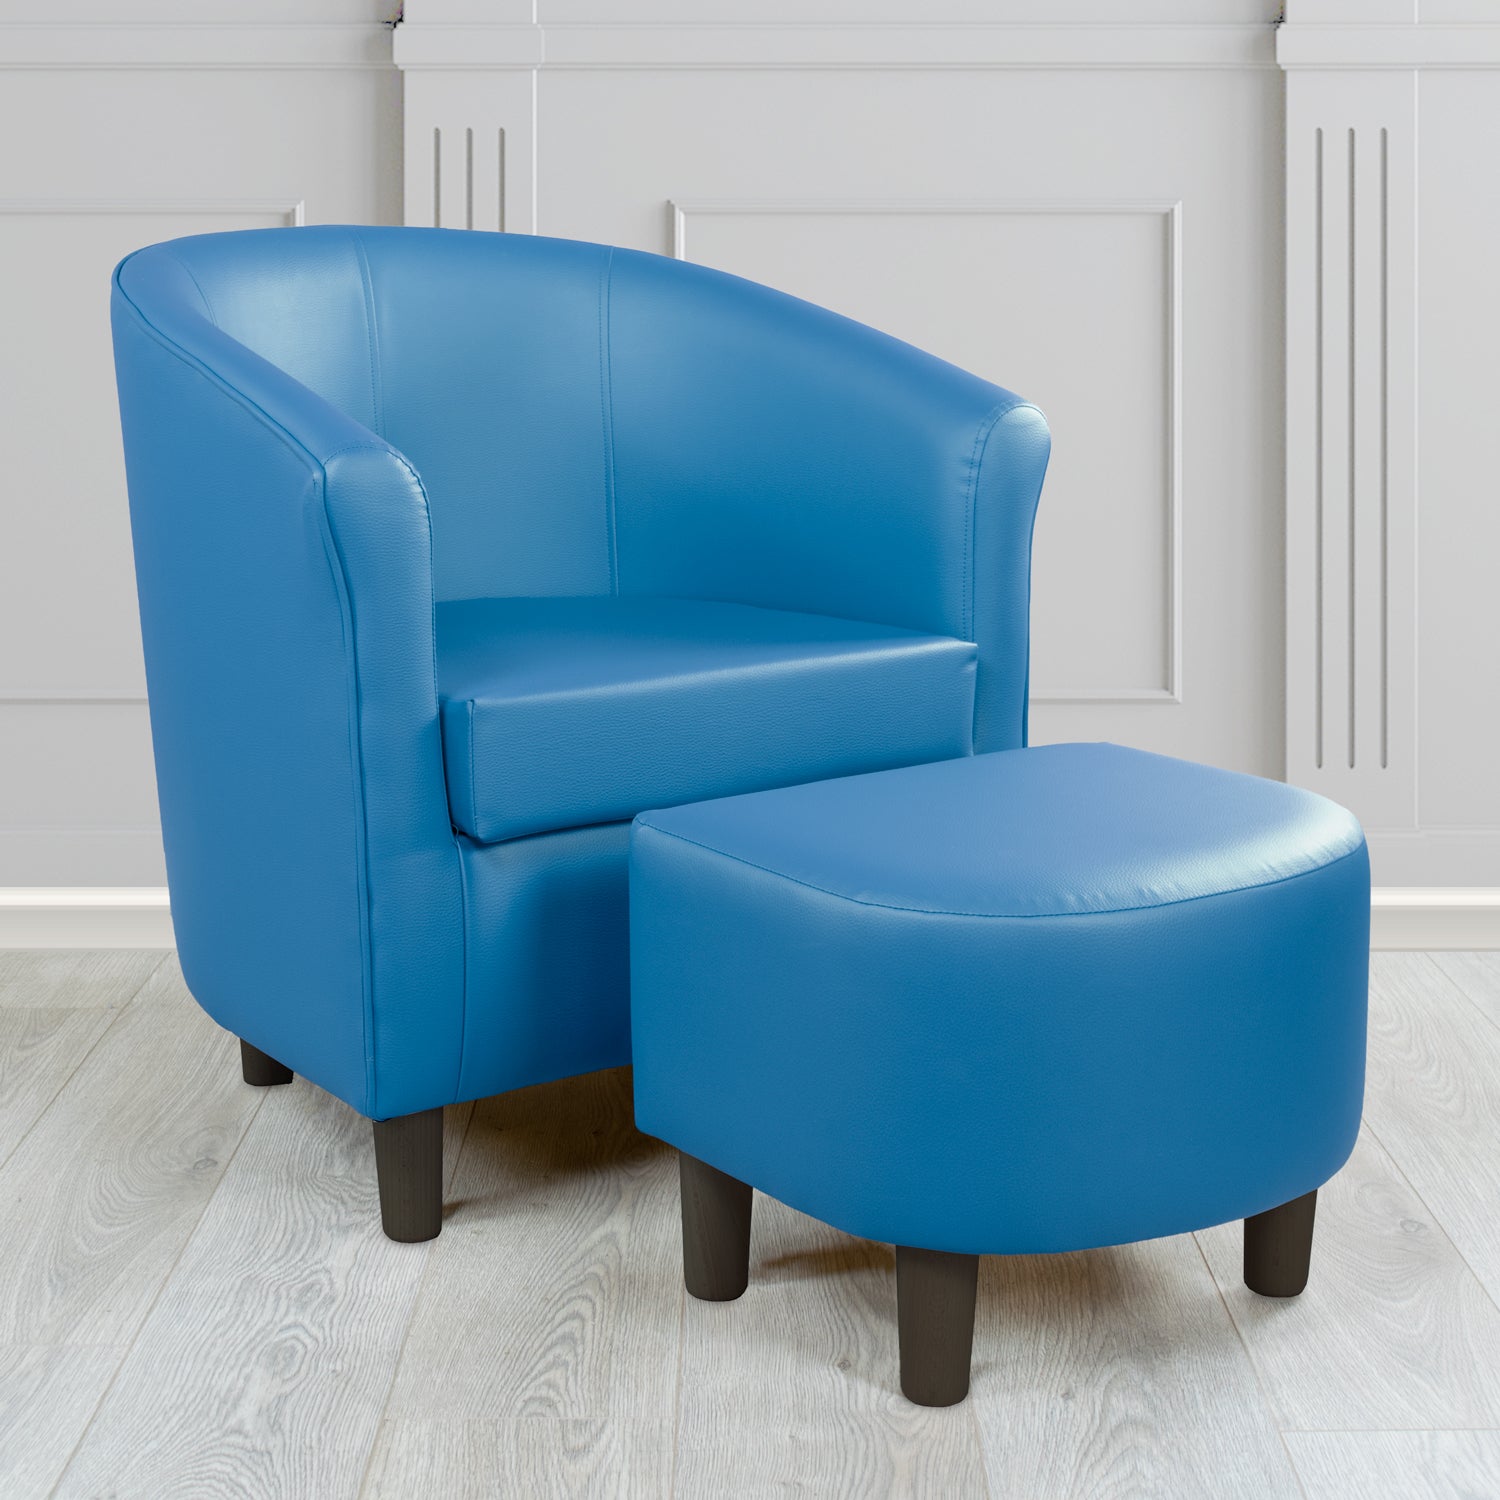 Express Tuscany Blue DBL Faux Leather Tub Chair with Footstool Set (6541294141482)